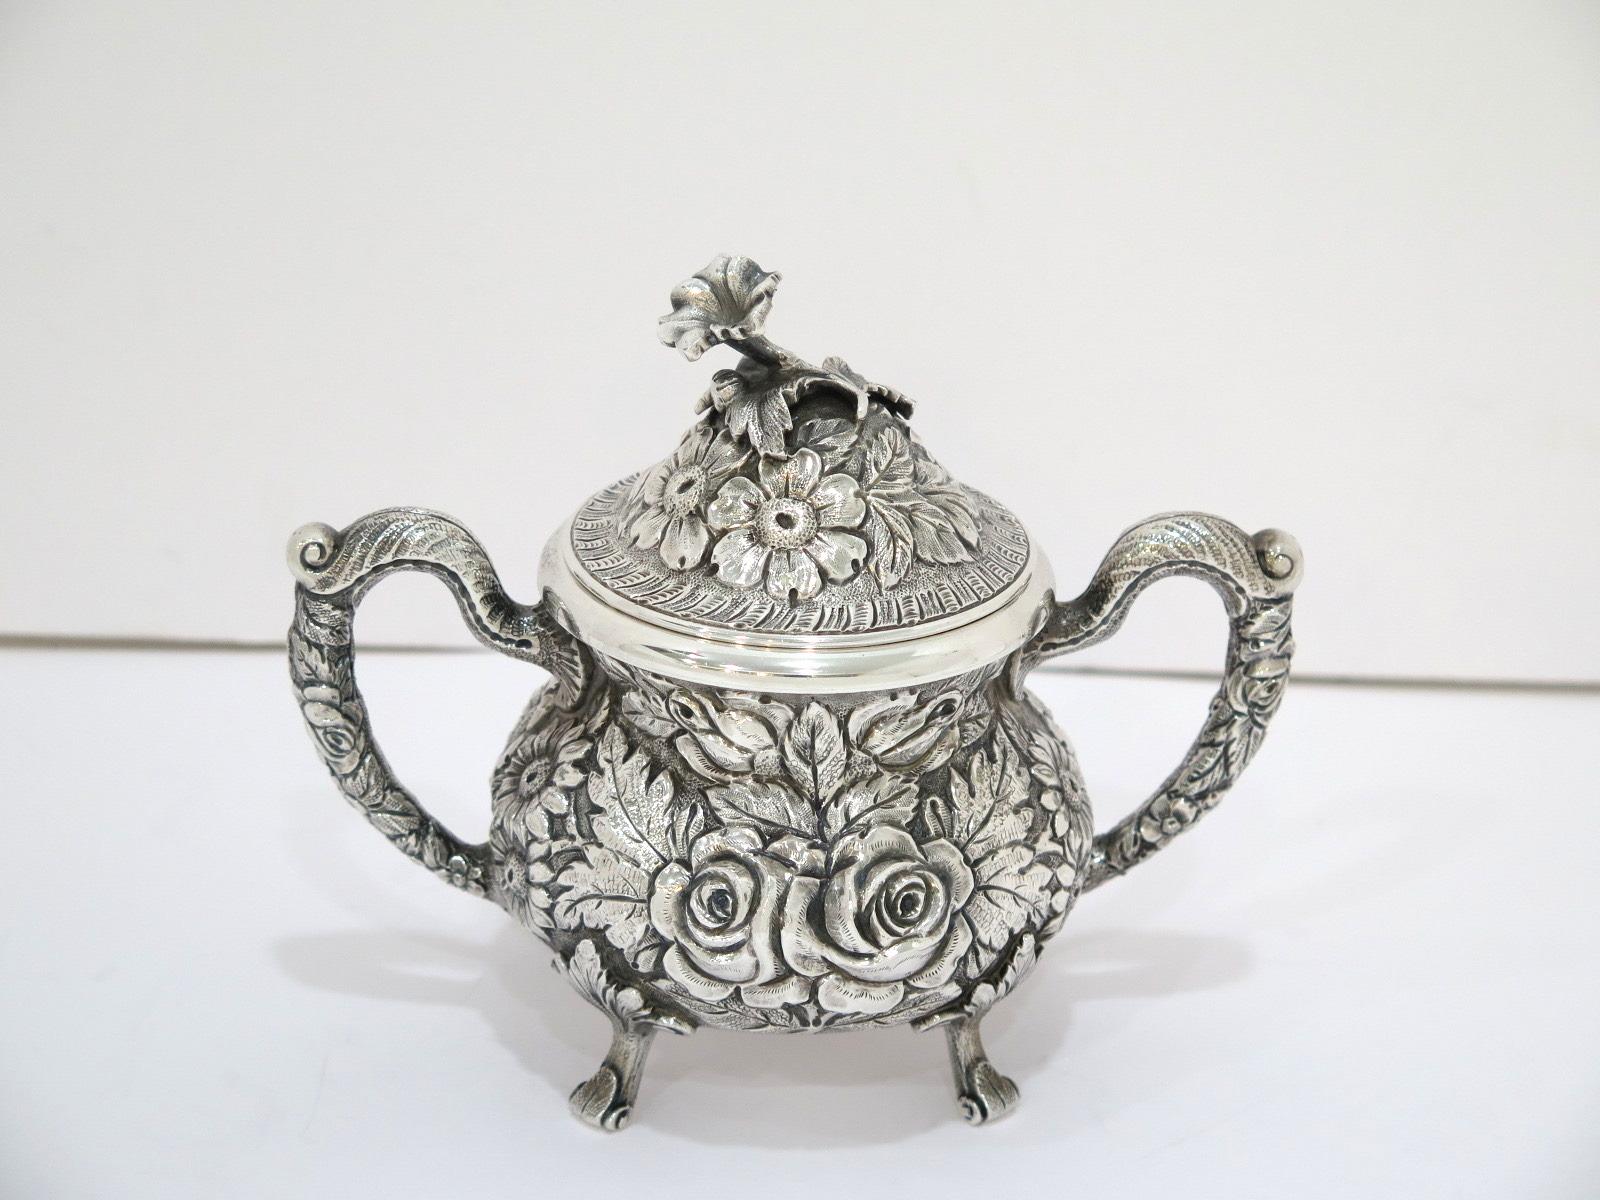 3 Piece-Sterling Silver Stieff Vintage Floral Repousse Tea / Coffee Service In Good Condition For Sale In Brooklyn, NY